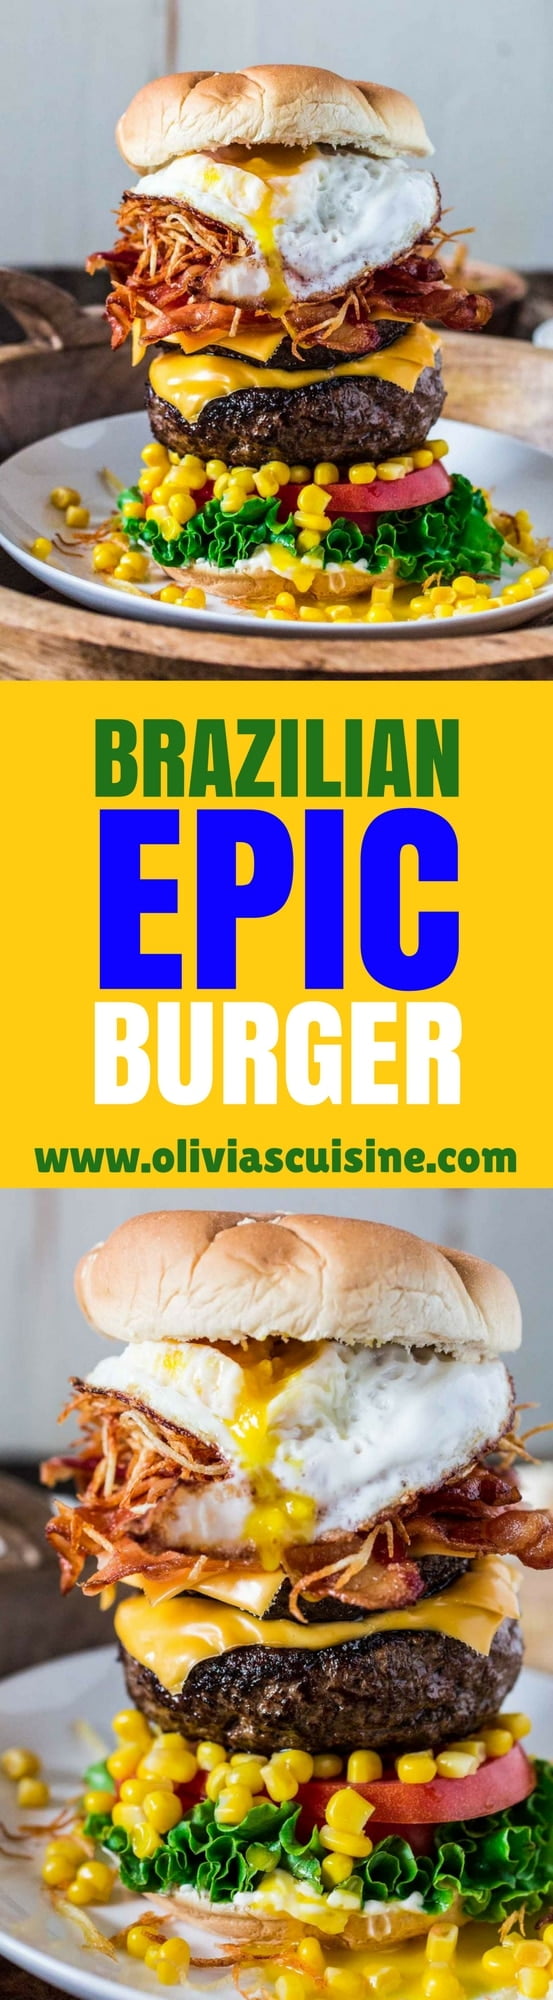 Brazilian Epic Burger with Egg | www.oliviascuisine.com | This monstrous burger is not for the faint of heart. Piled high with two burger patties and an assortment of bold toppings, no burger is more EPIC than this!